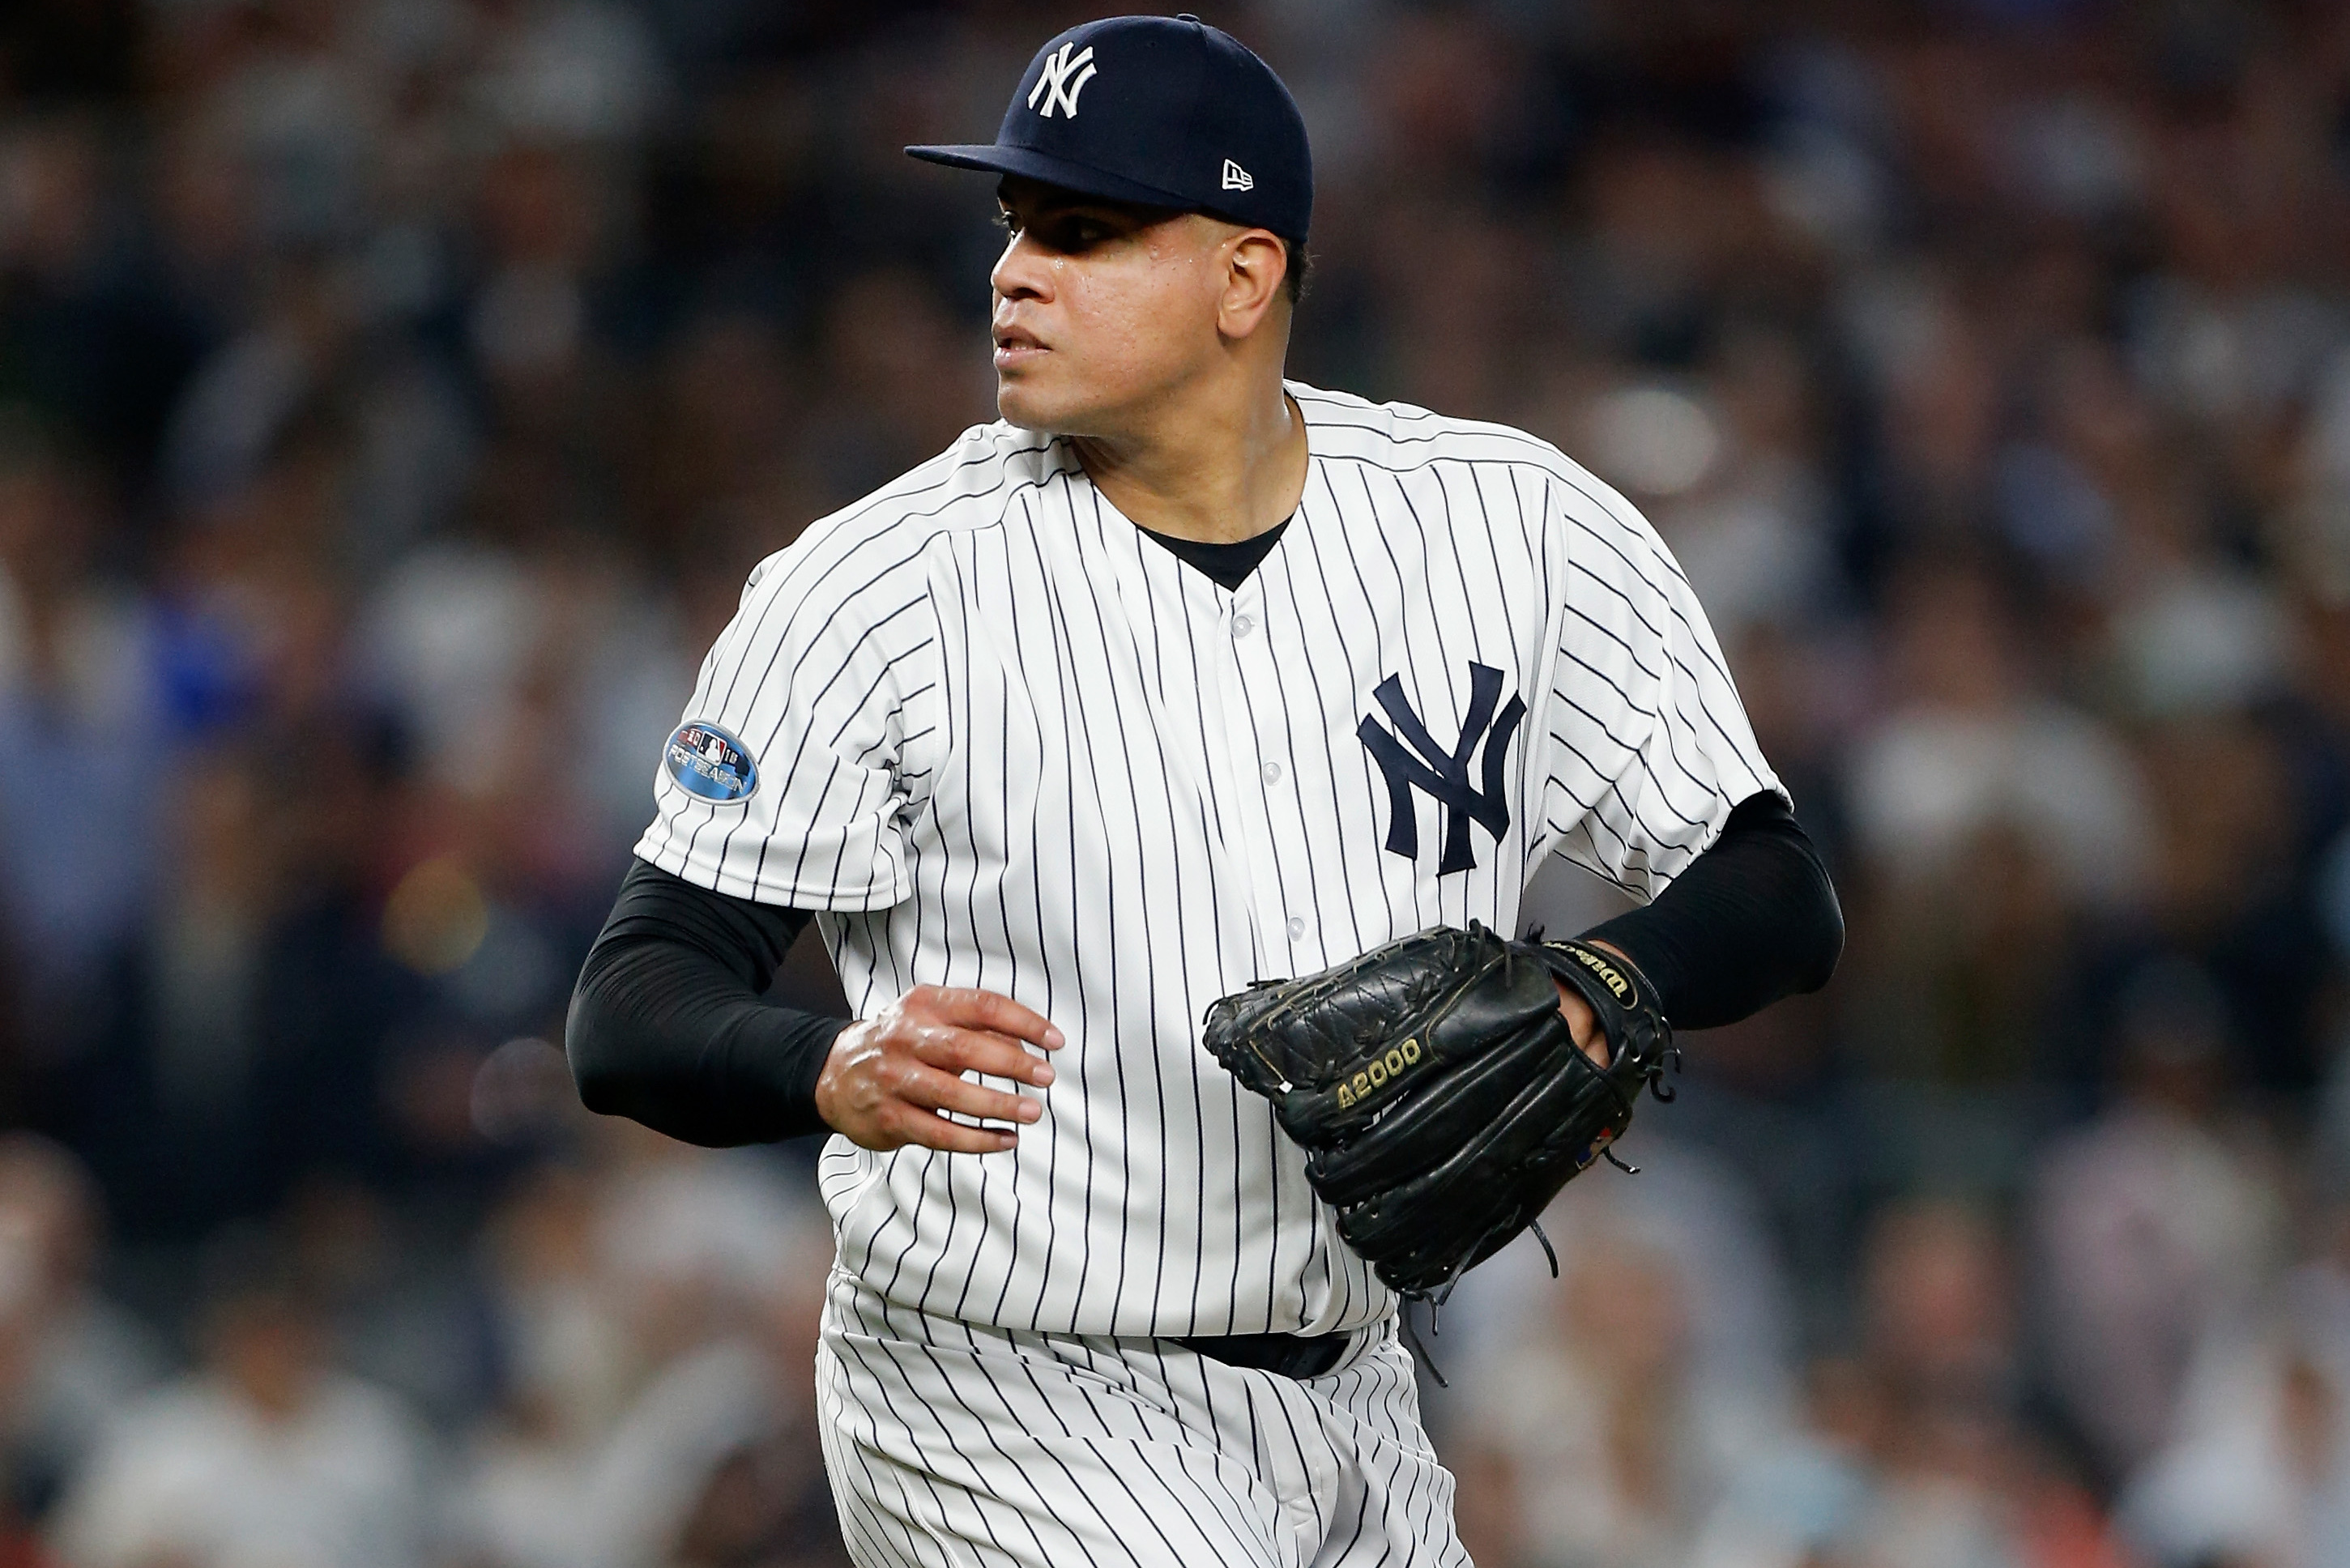 Yankees' Dellin Betances Loses in Arbitration, and a War of Words